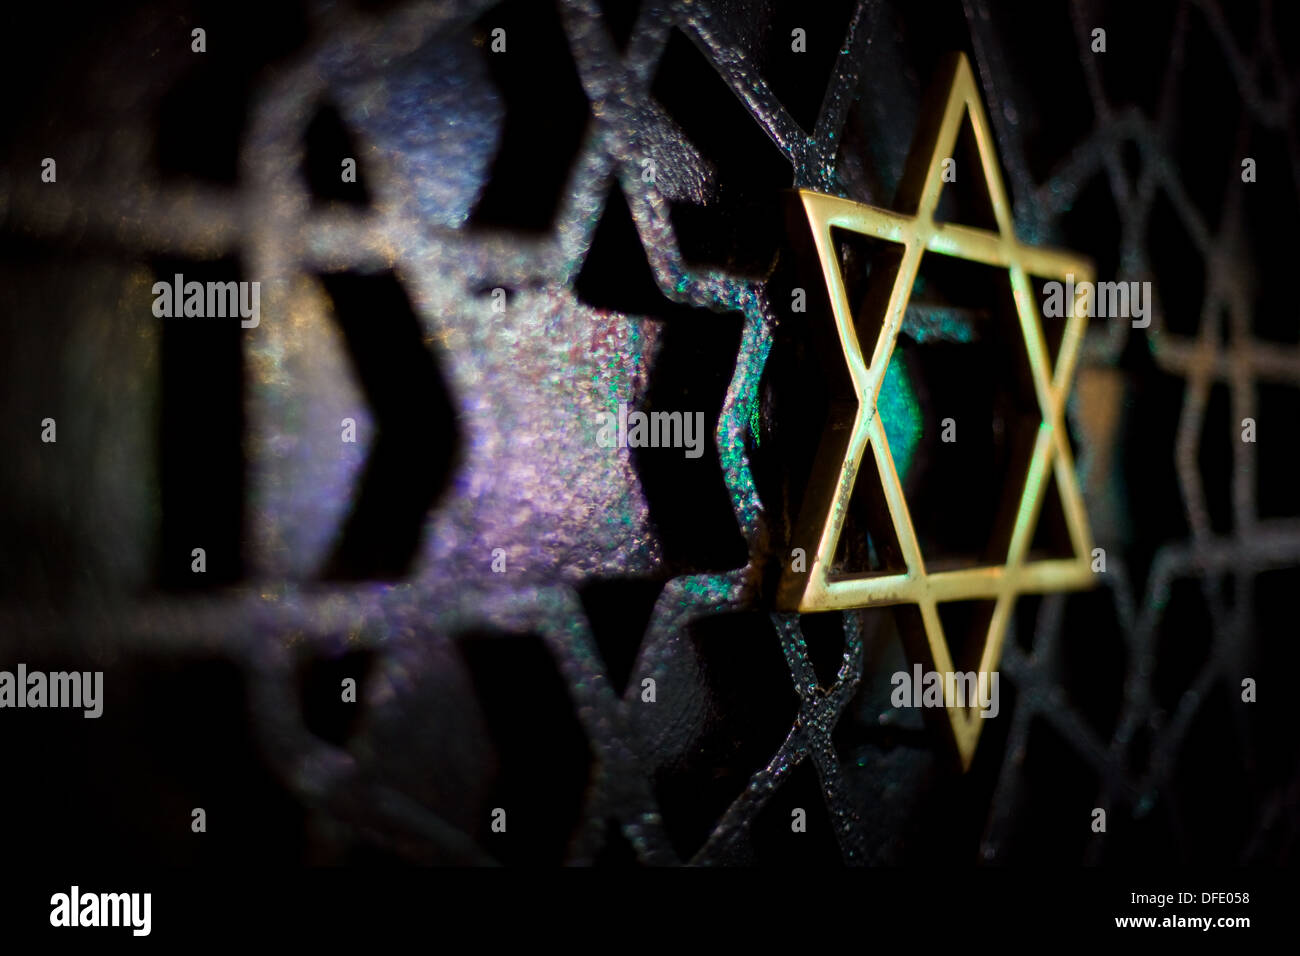 Gold coloured star design on a metal gate in Istanbul, Turkey. Lit by the colourful lights from surrounding shops and stalls Stock Photo